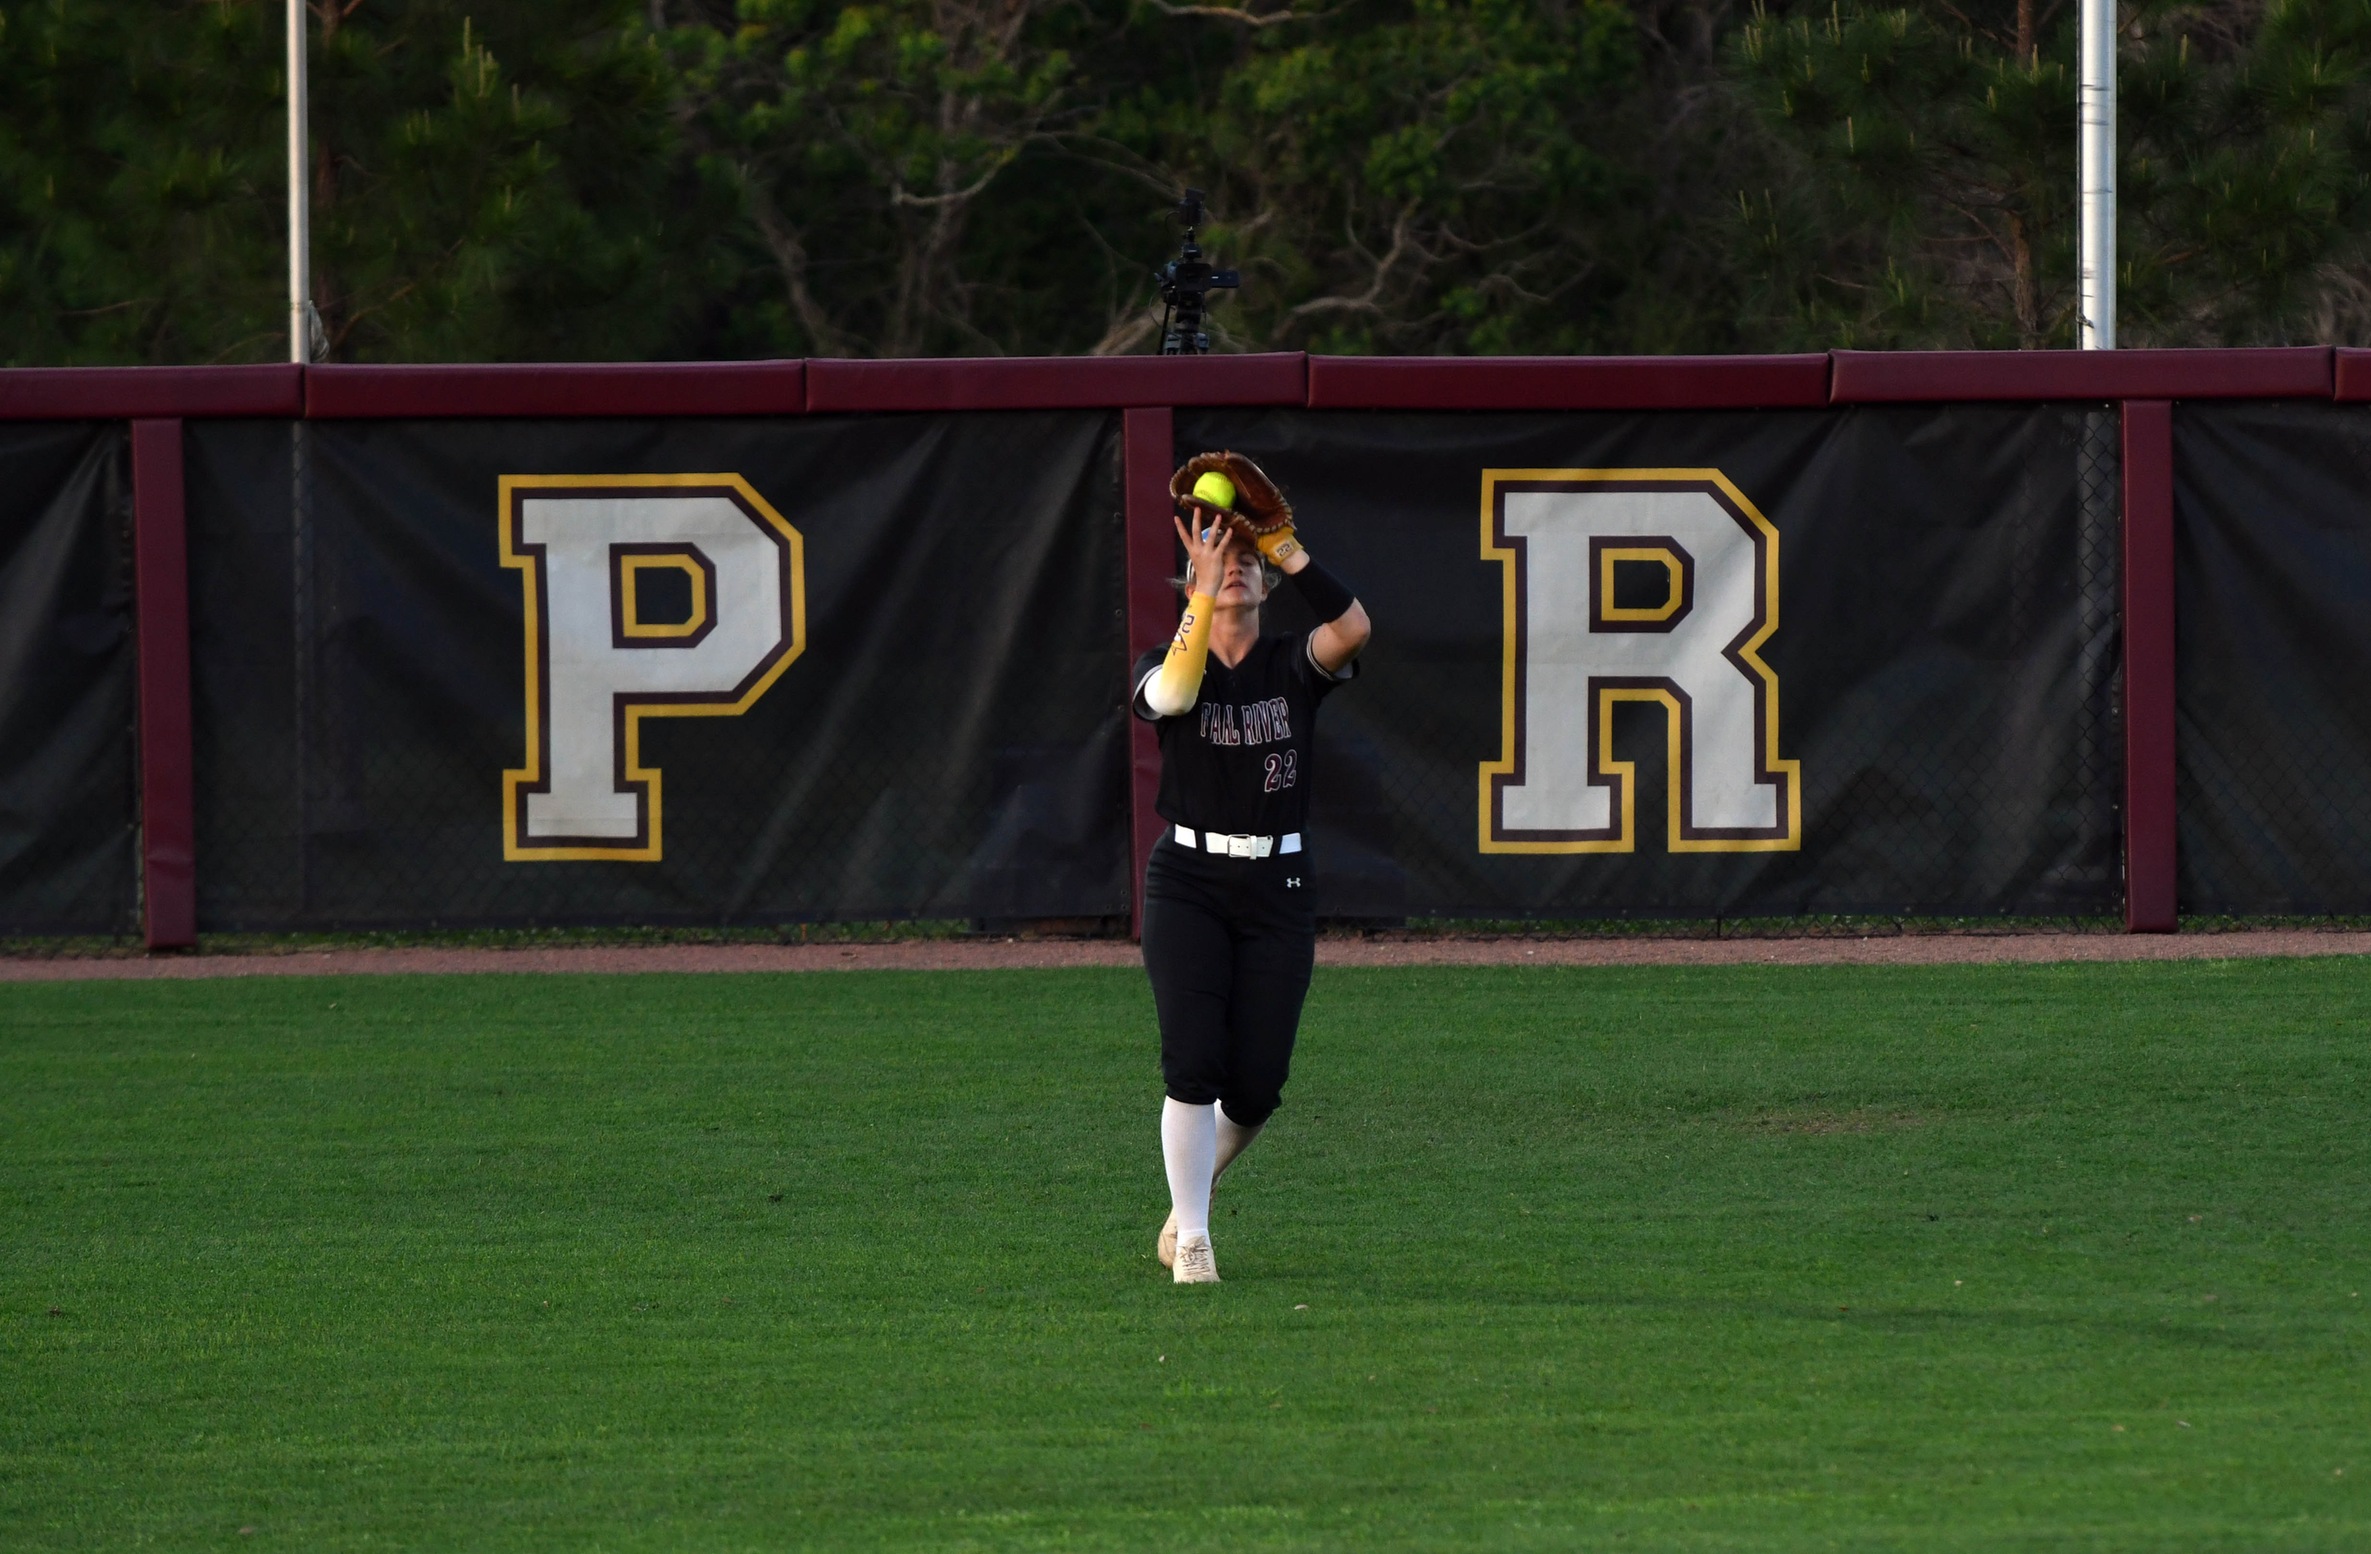 Lights out hitting and dominant pitching guide No. 11 Pearl River past Hinds